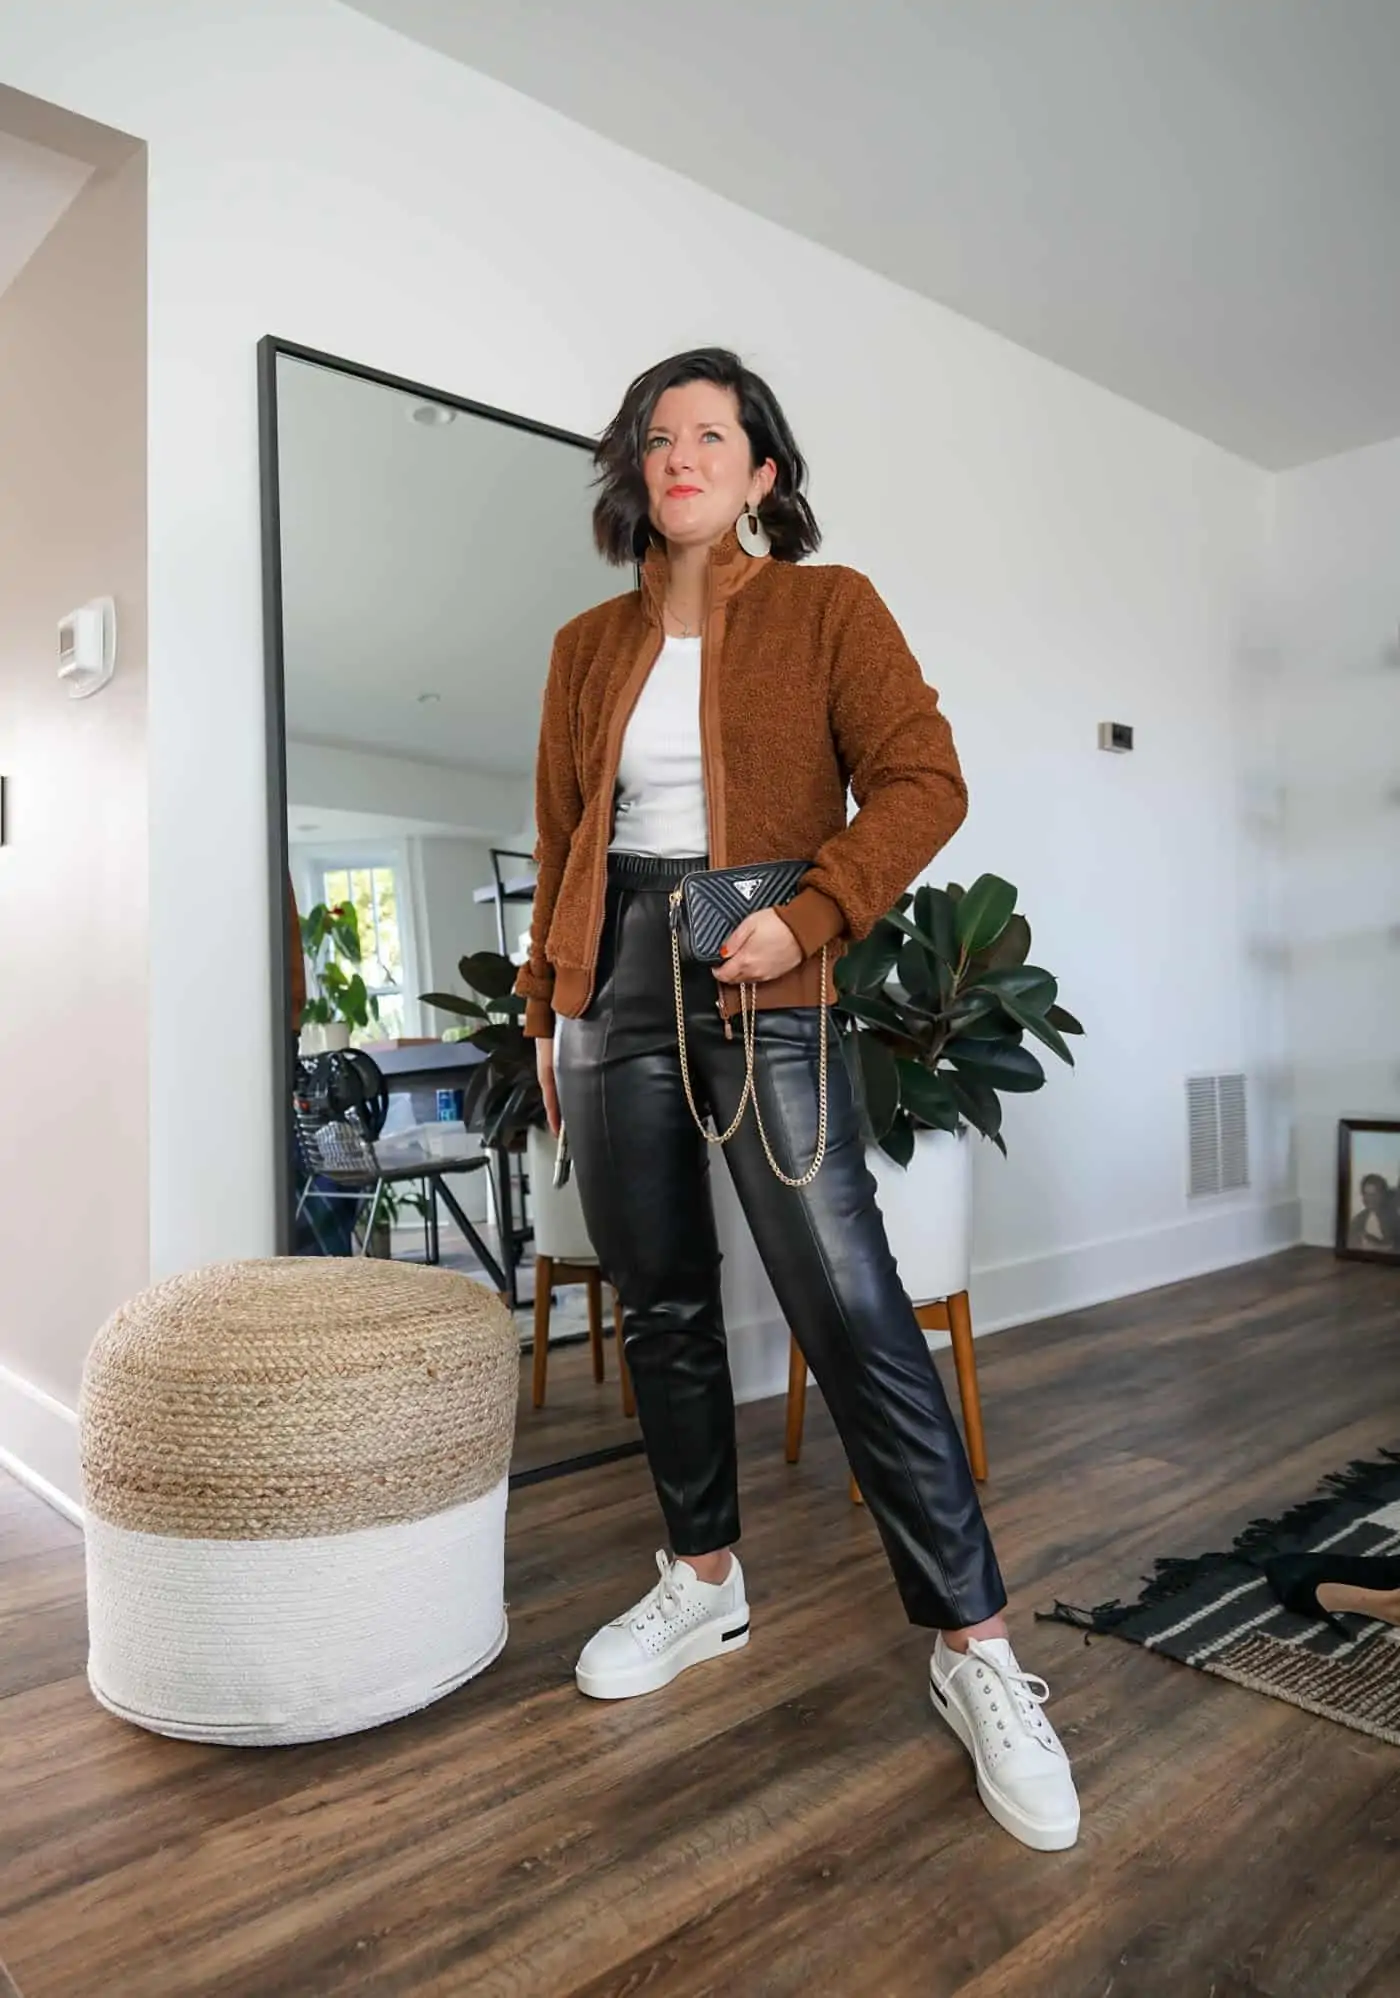 A Lily Love Affair wearing womes faux leather pants with a brown sherpa jacket and white sneakers